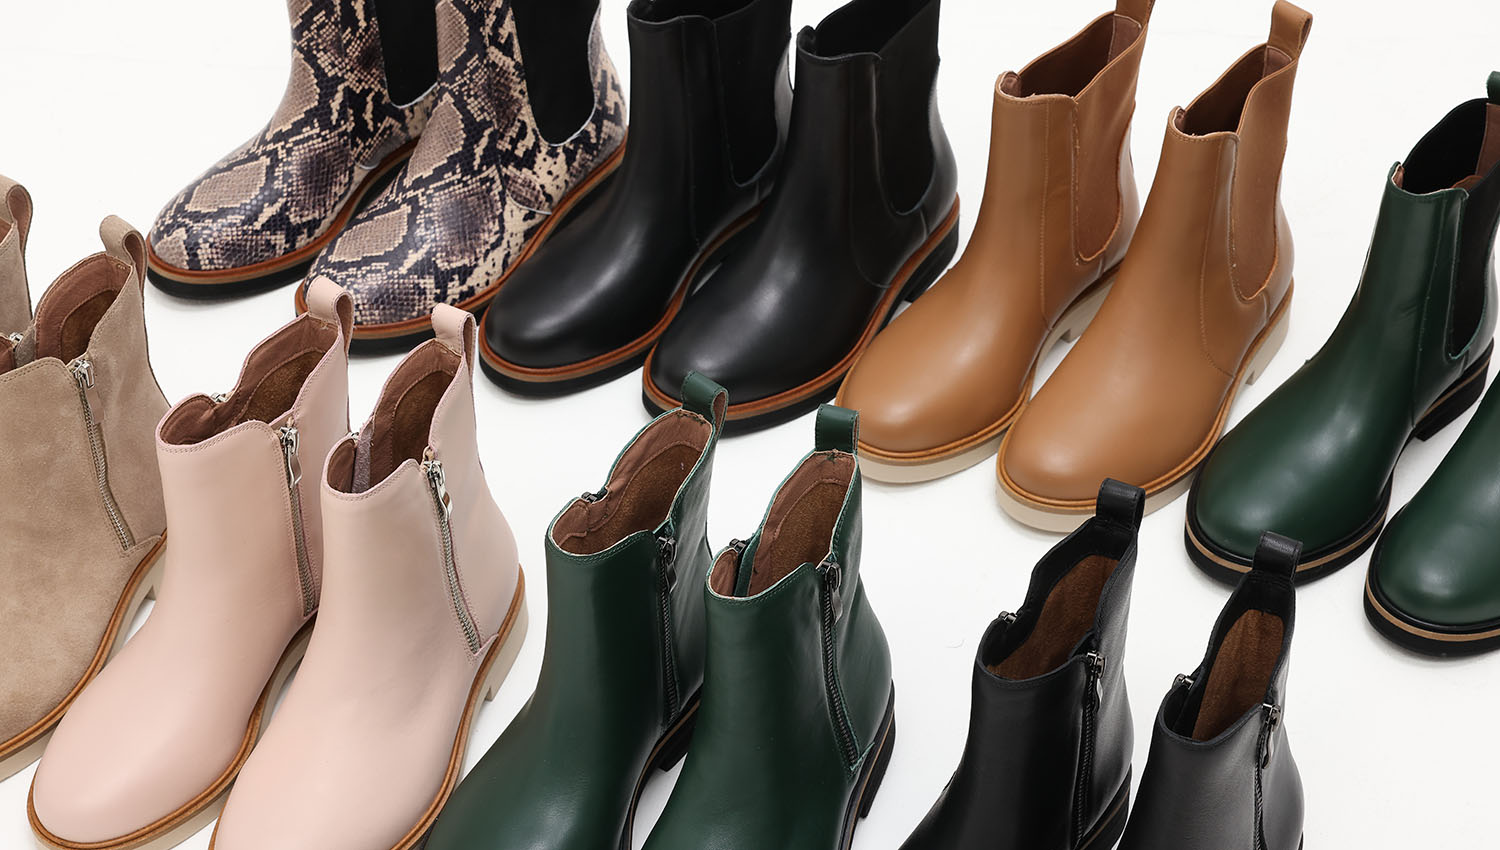 Essential Tips for Maintaining and Caring for Leather Boots